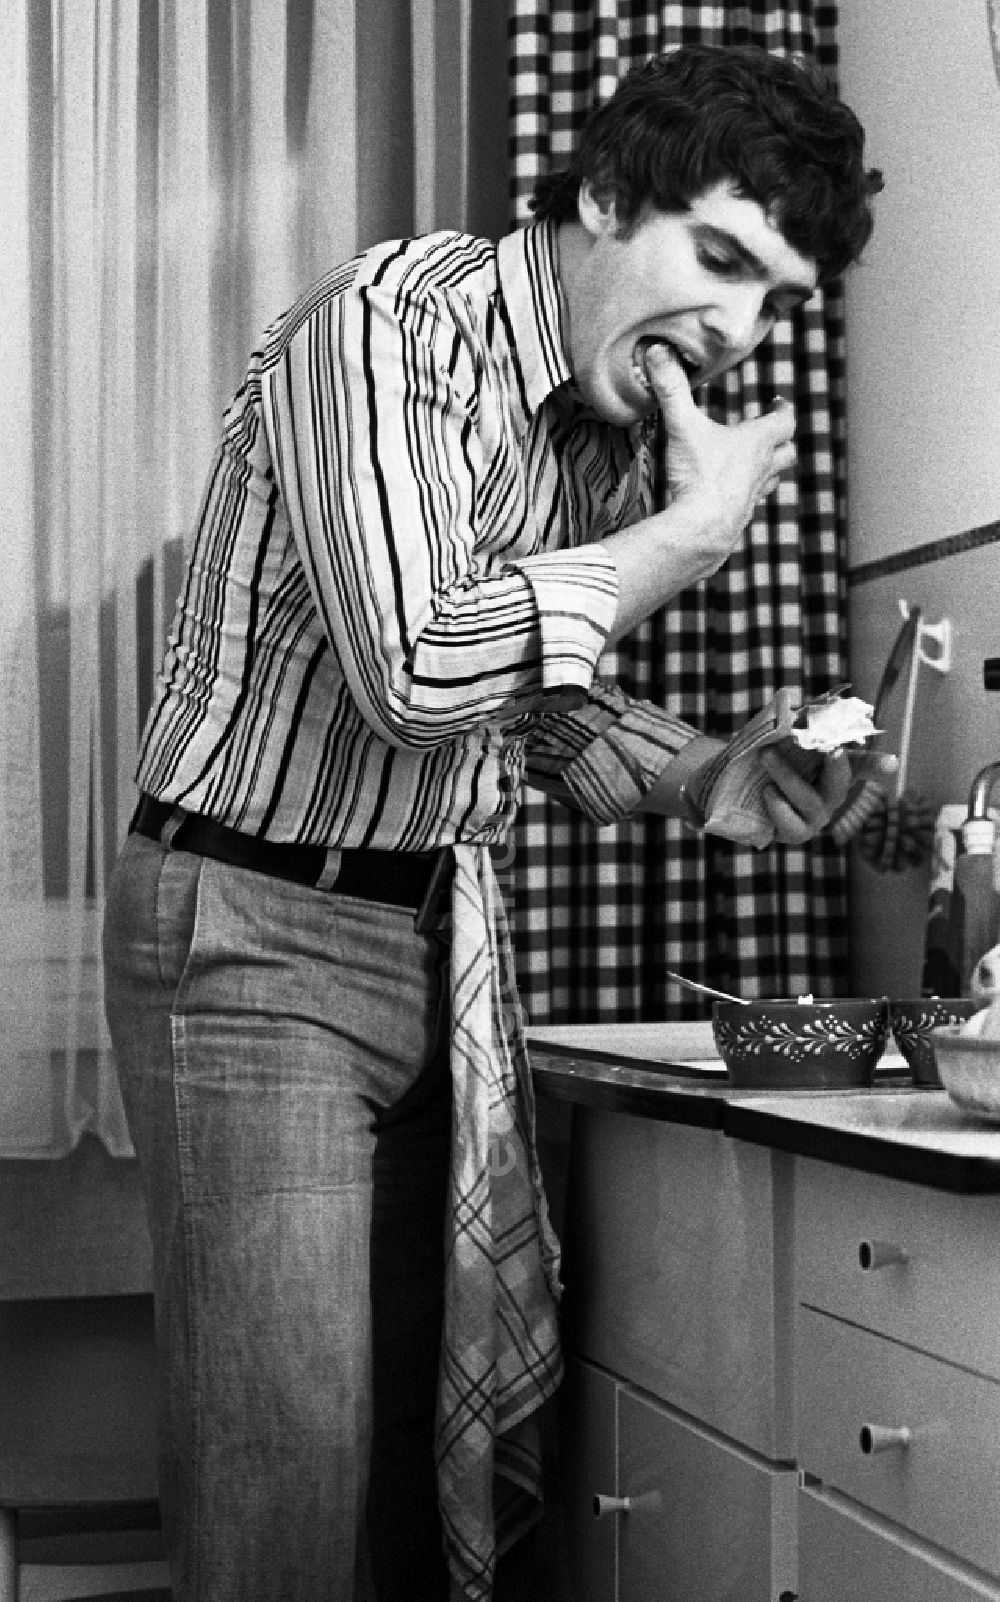 GDR photo archive: Berlin - Portrait shot of the singer and musician Frank Schoebel in the kitchen of his apartment doing housework in the district Mitte in Berlin Eastberlin, the former capital of the GDR, German Democratic Republic